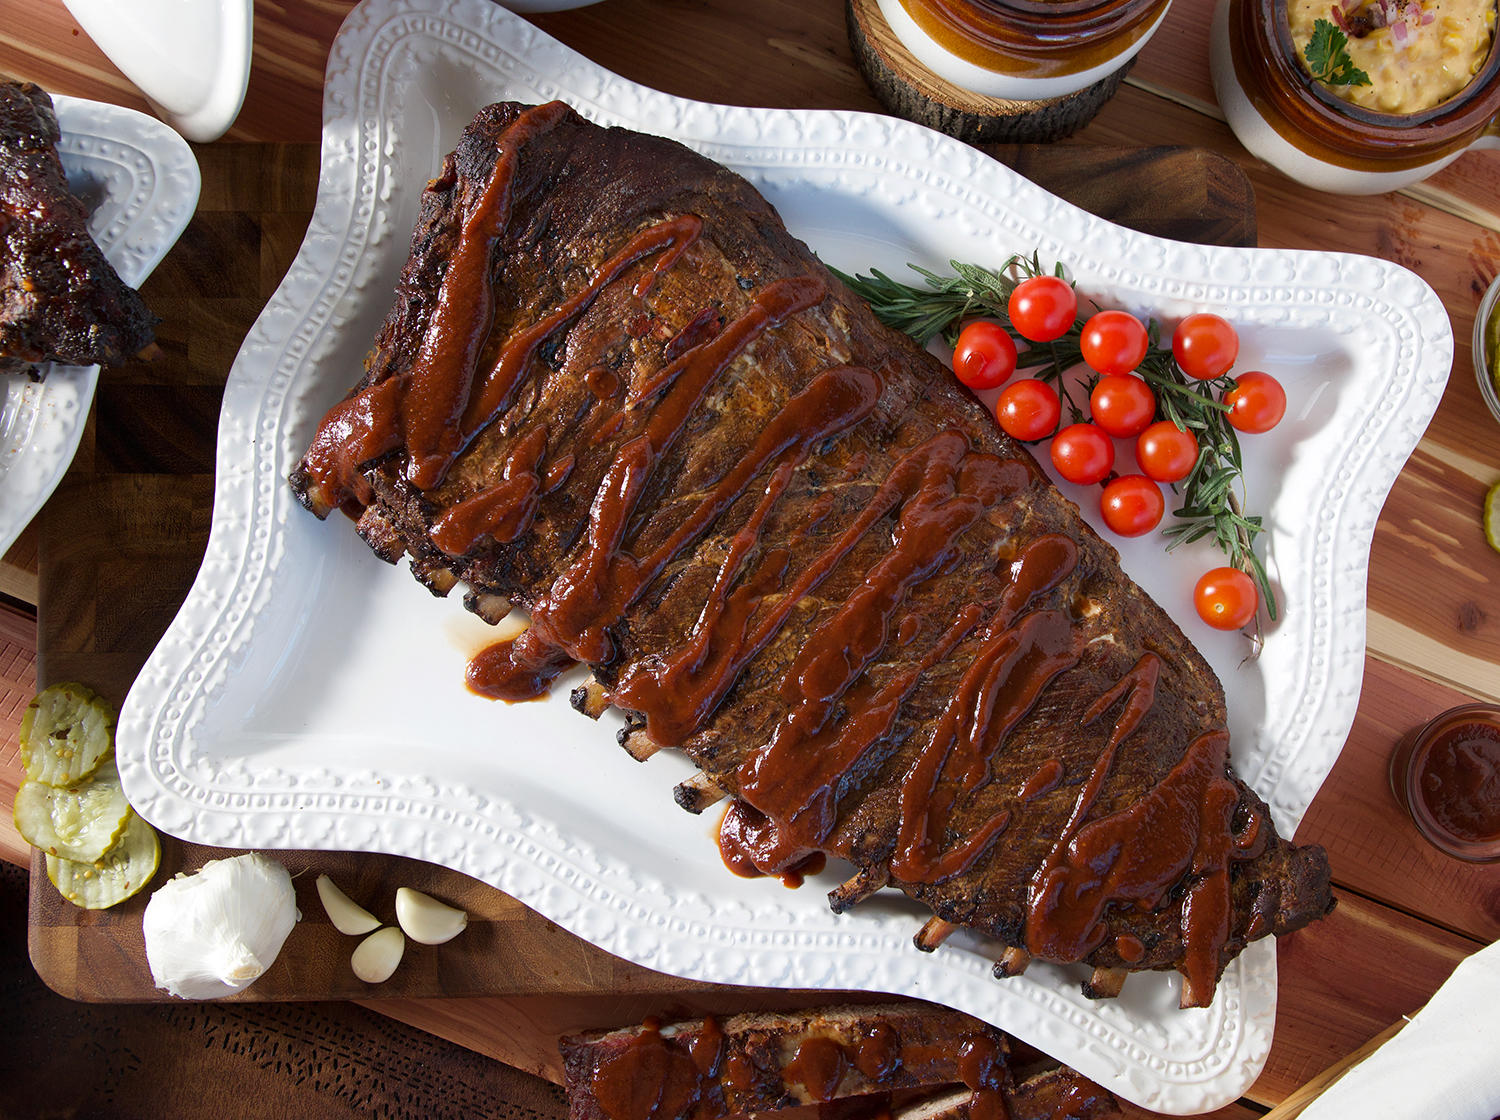 Our delicious Pork Spare Ribs are a Kansas City mainstay. Each tender, meaty slab is expertly rubbed with our own special blend of spices and slow roasted over hickory logs until juicy. They are served with one of our celebrated sauces for a blue-ribbon dining experience.